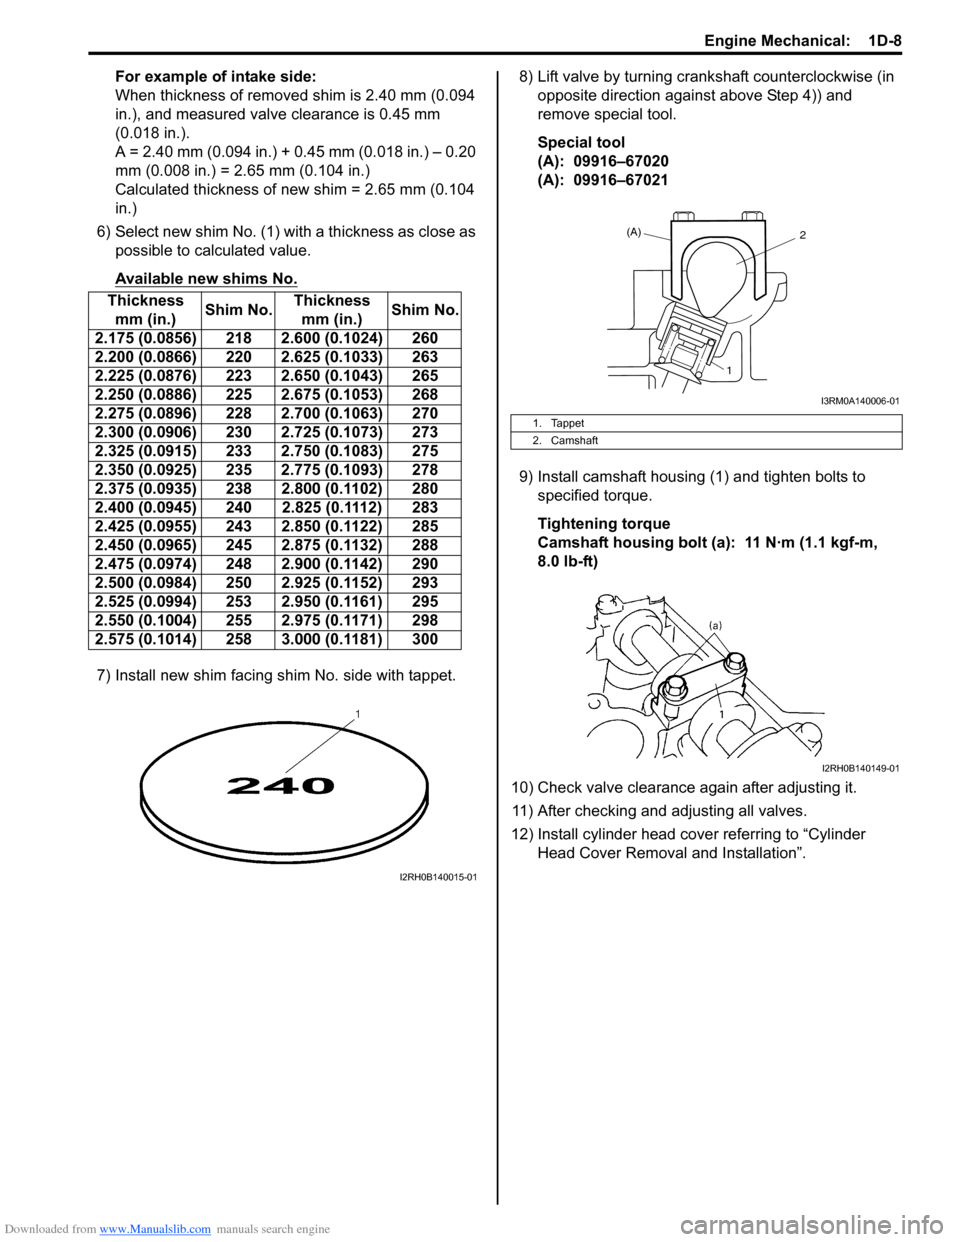 SUZUKI SWIFT 2006 2.G Service User Guide Downloaded from www.Manualslib.com manuals search engine Engine Mechanical:  1D-8
For example of intake side:
When thickness of removed shim is 2.40 mm (0.094 
in.), and measured valve clearance is 0.